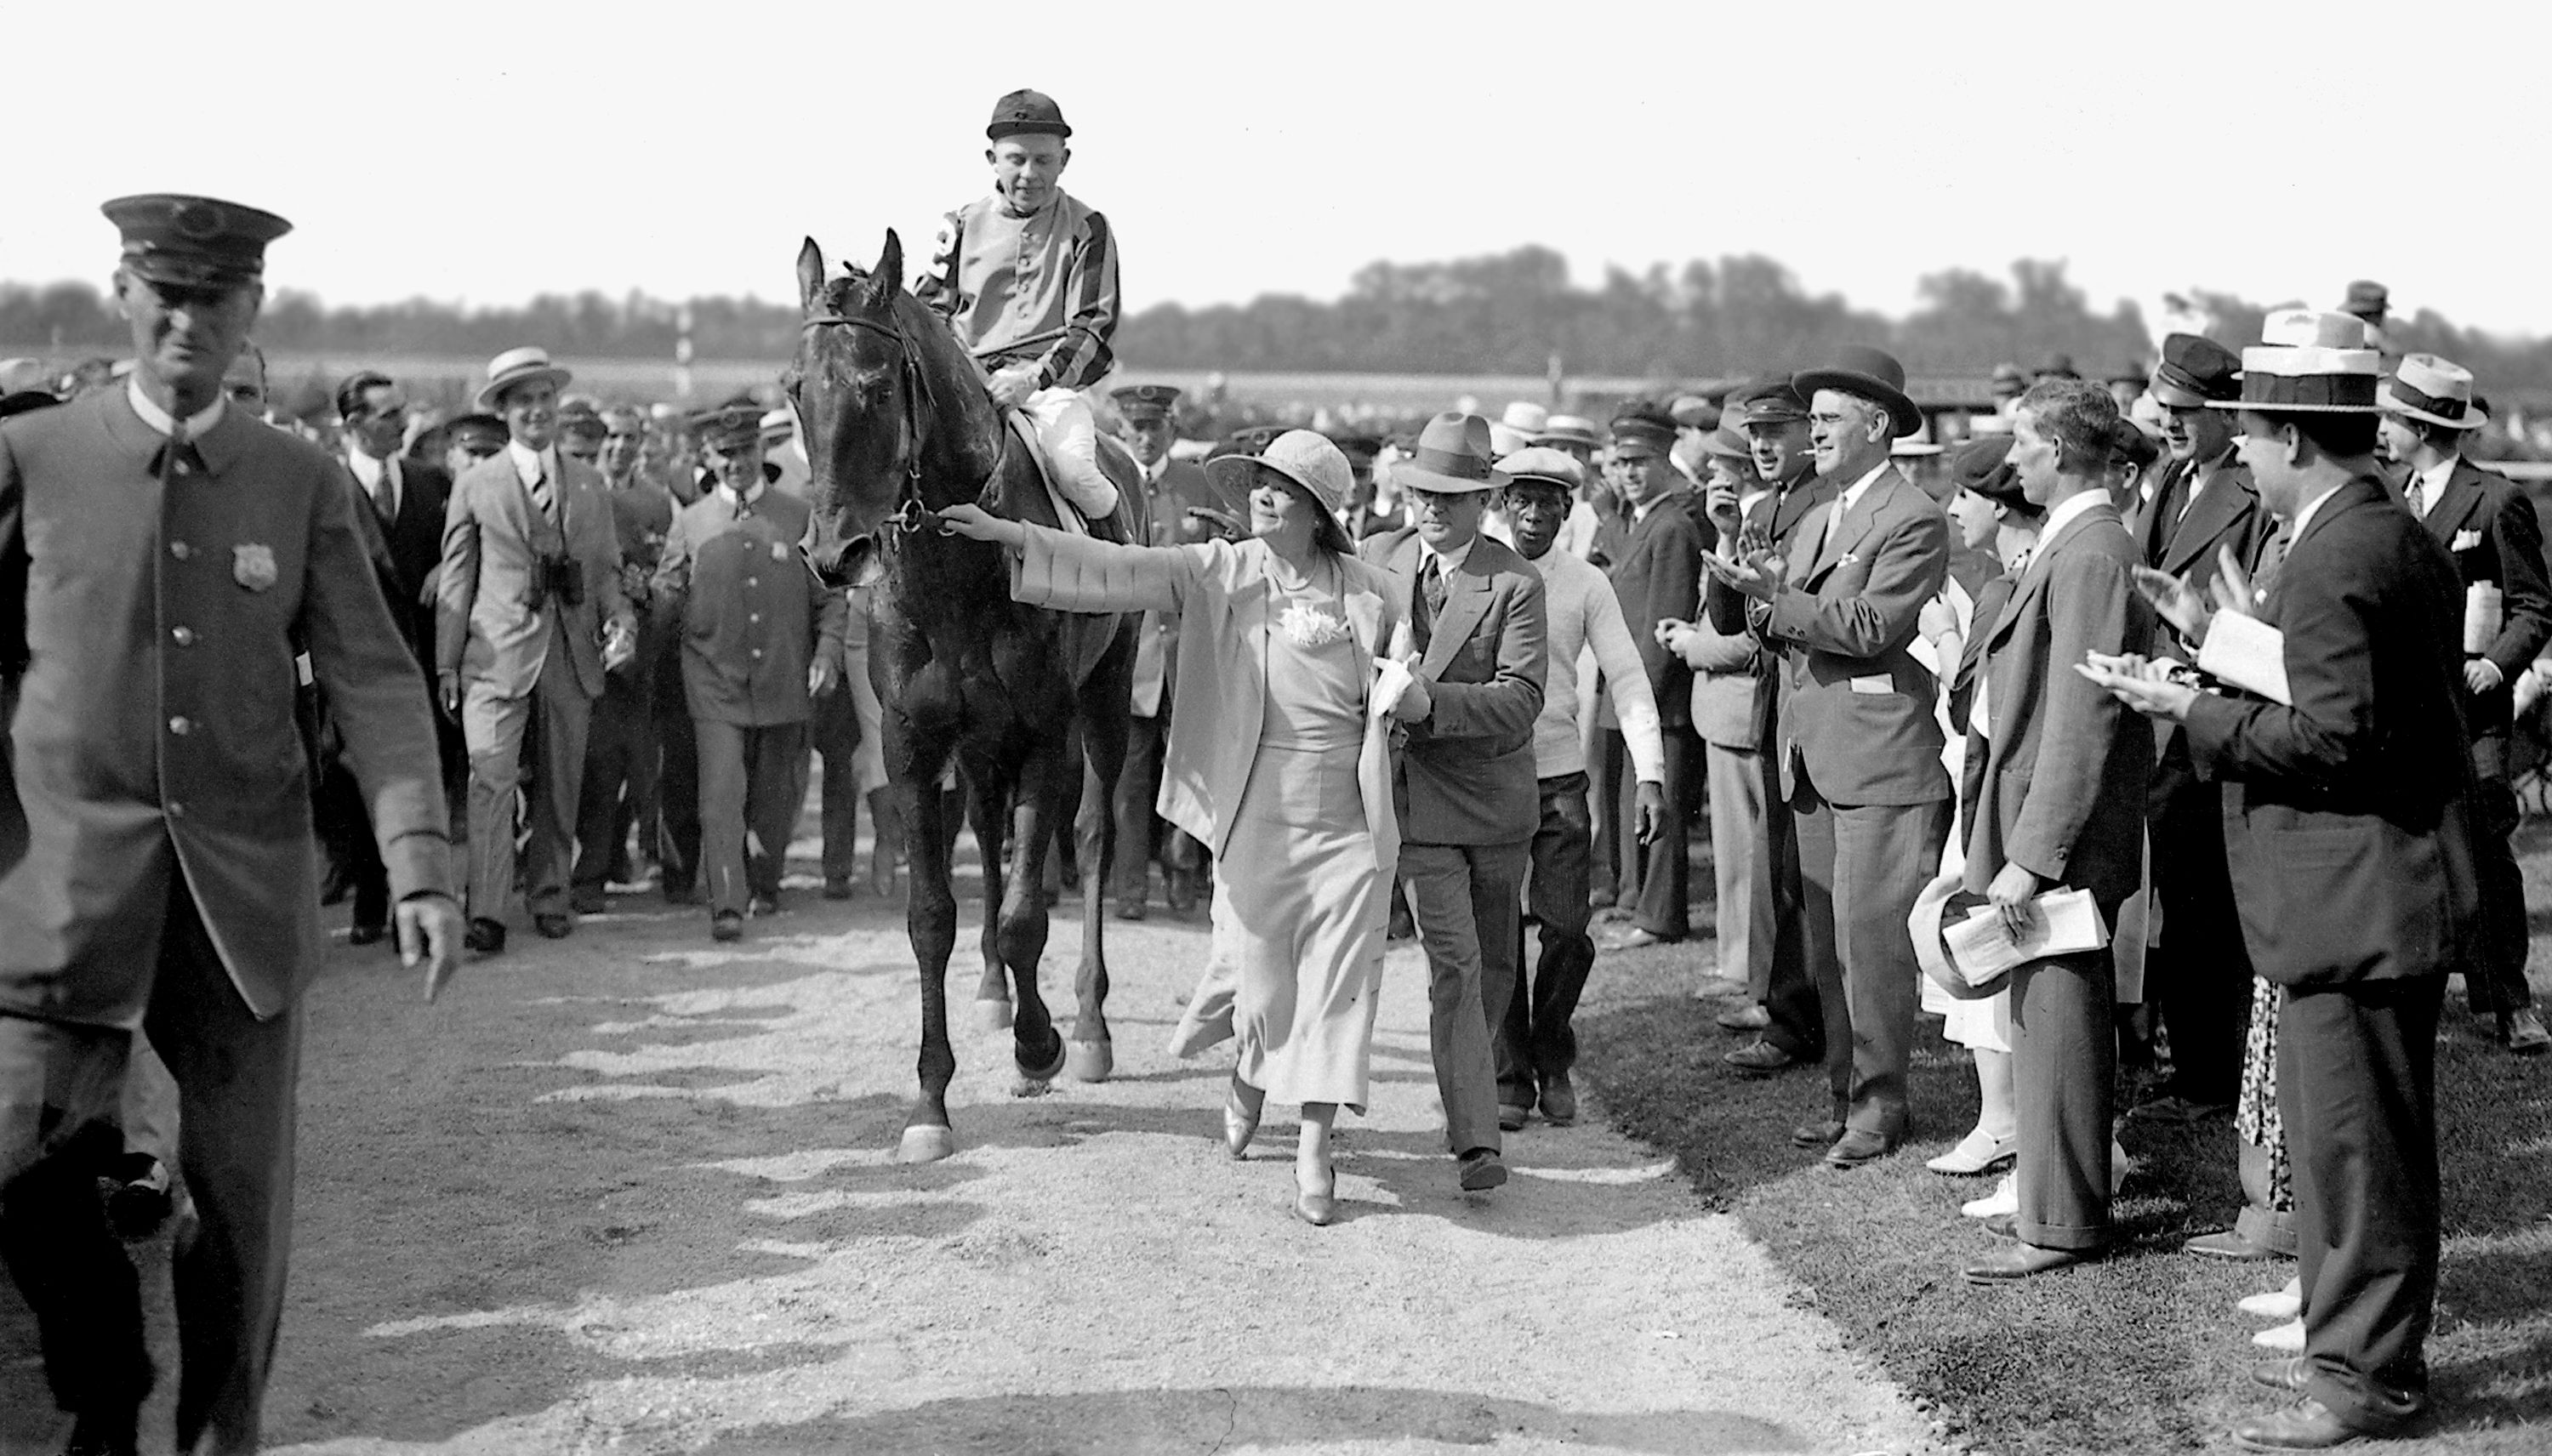 Helen Hay Whitney leading Twenty Grand, Charles Kurtsinger up, into the Belmont winner's circle (Keeneland Library Cook Collection)